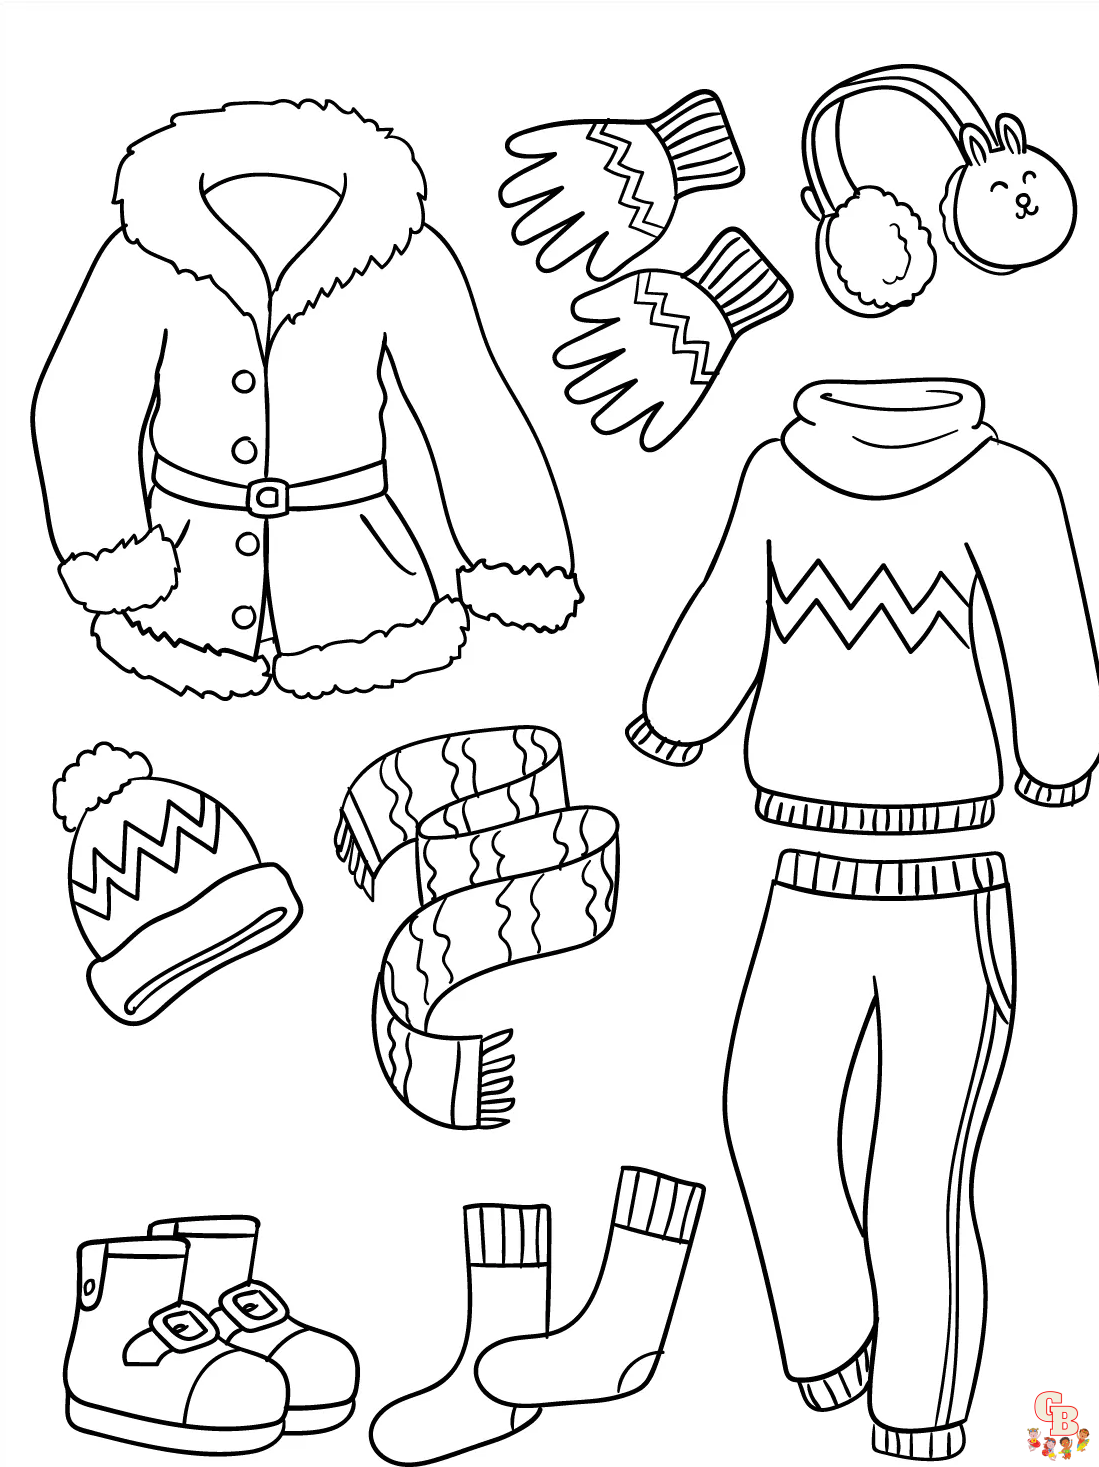 Clothes coloring pages free printable and easy coloring sheets